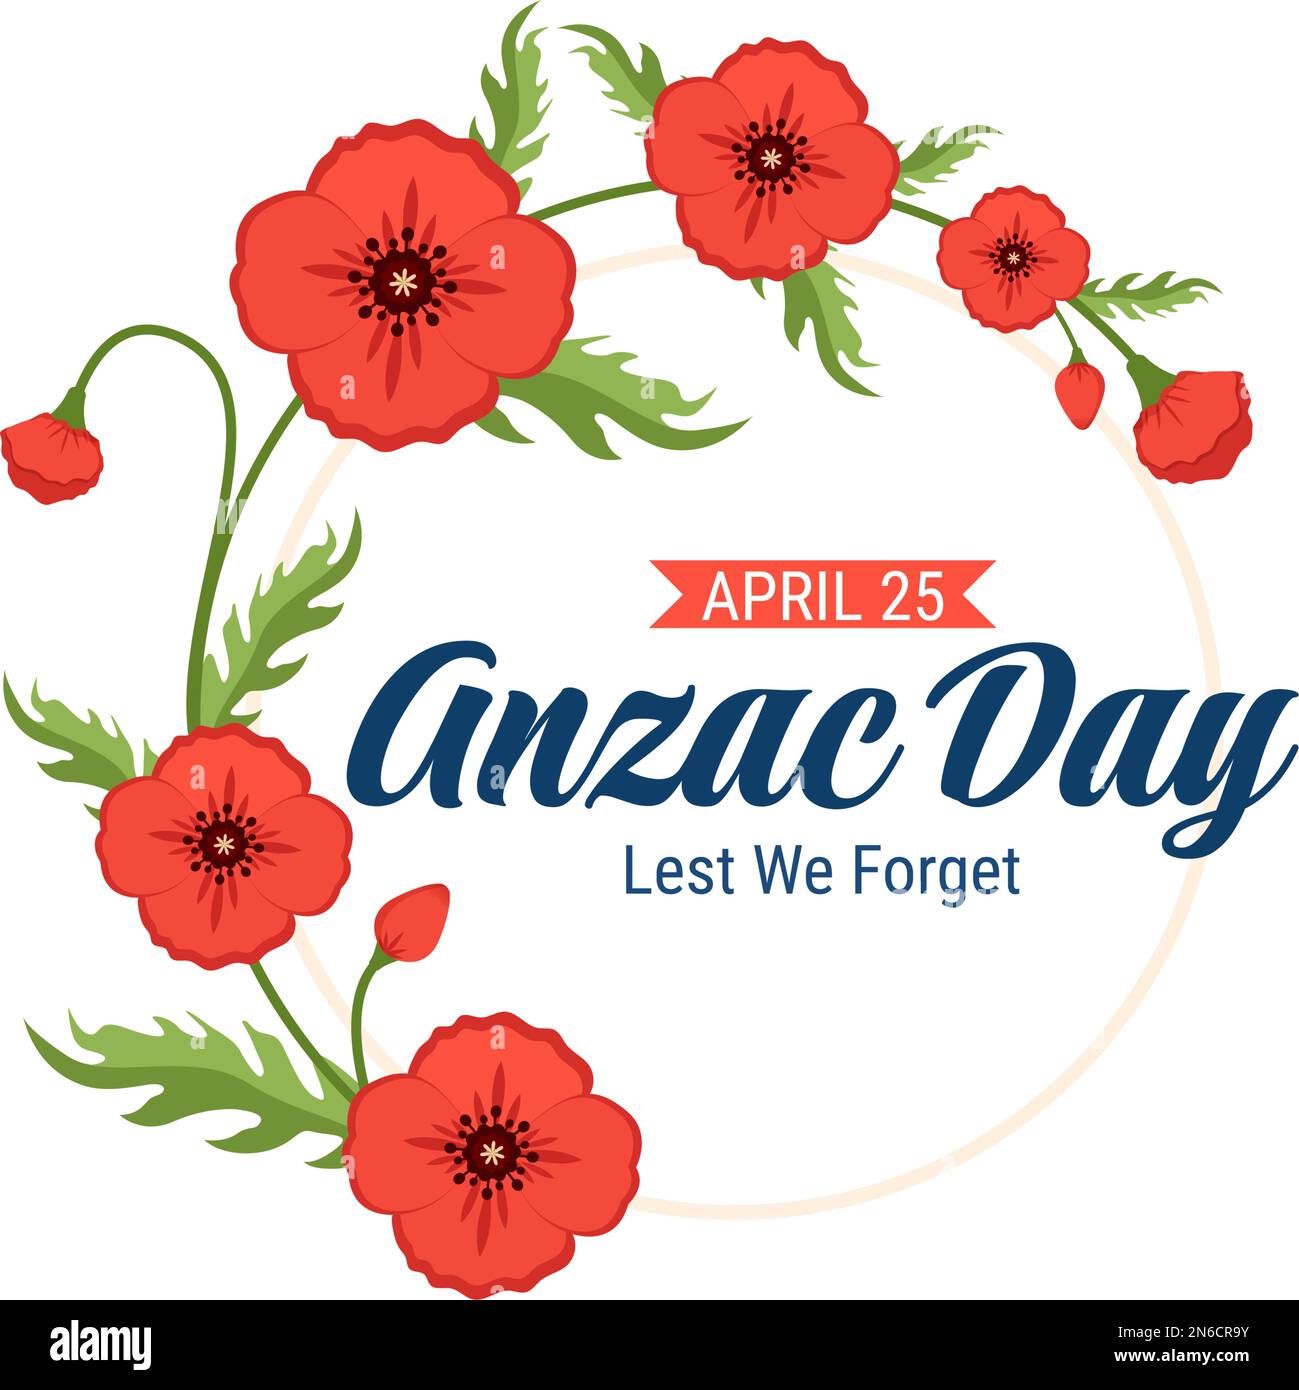 Anzac Day of Lest We Forget Illustration with Remembrance Soldier Paying Respect and Red Poppy Flower in Flat Hand Drawn for Landing Page Templates Stock Vector